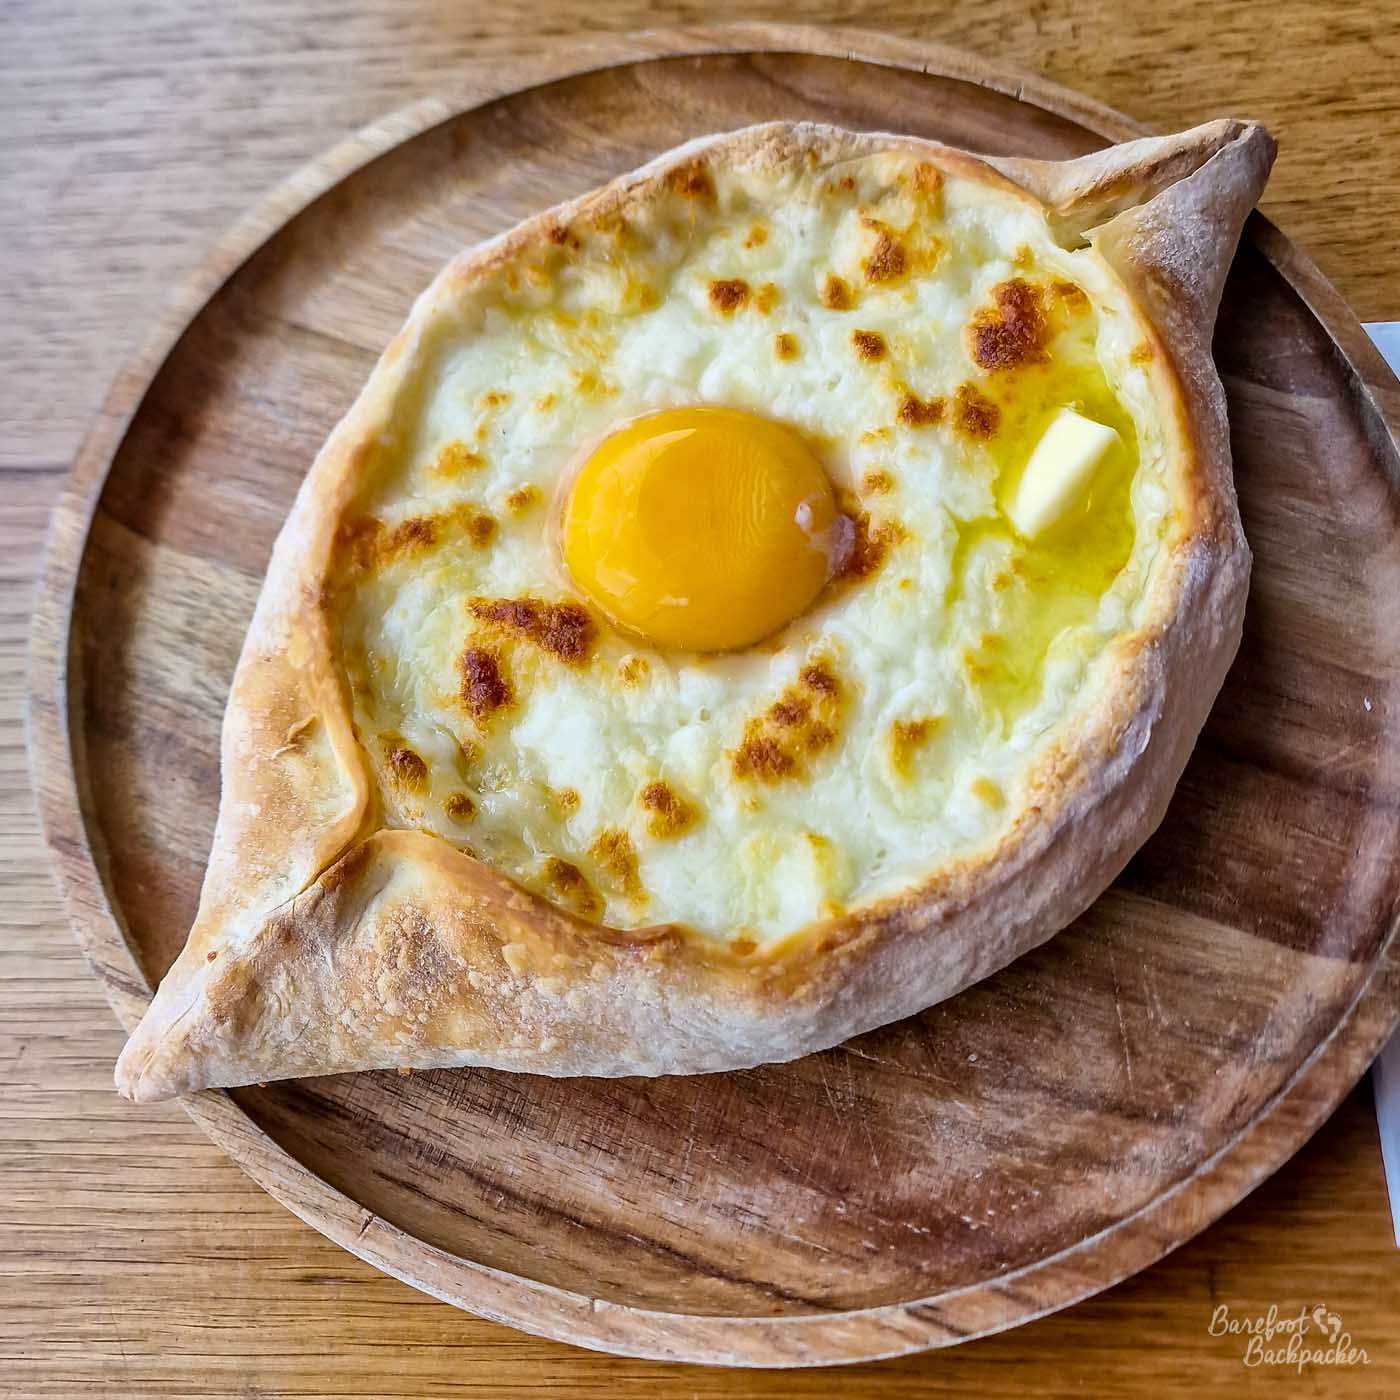 A picture of a roughly circular piece of bread, covered with cheese and an egg.